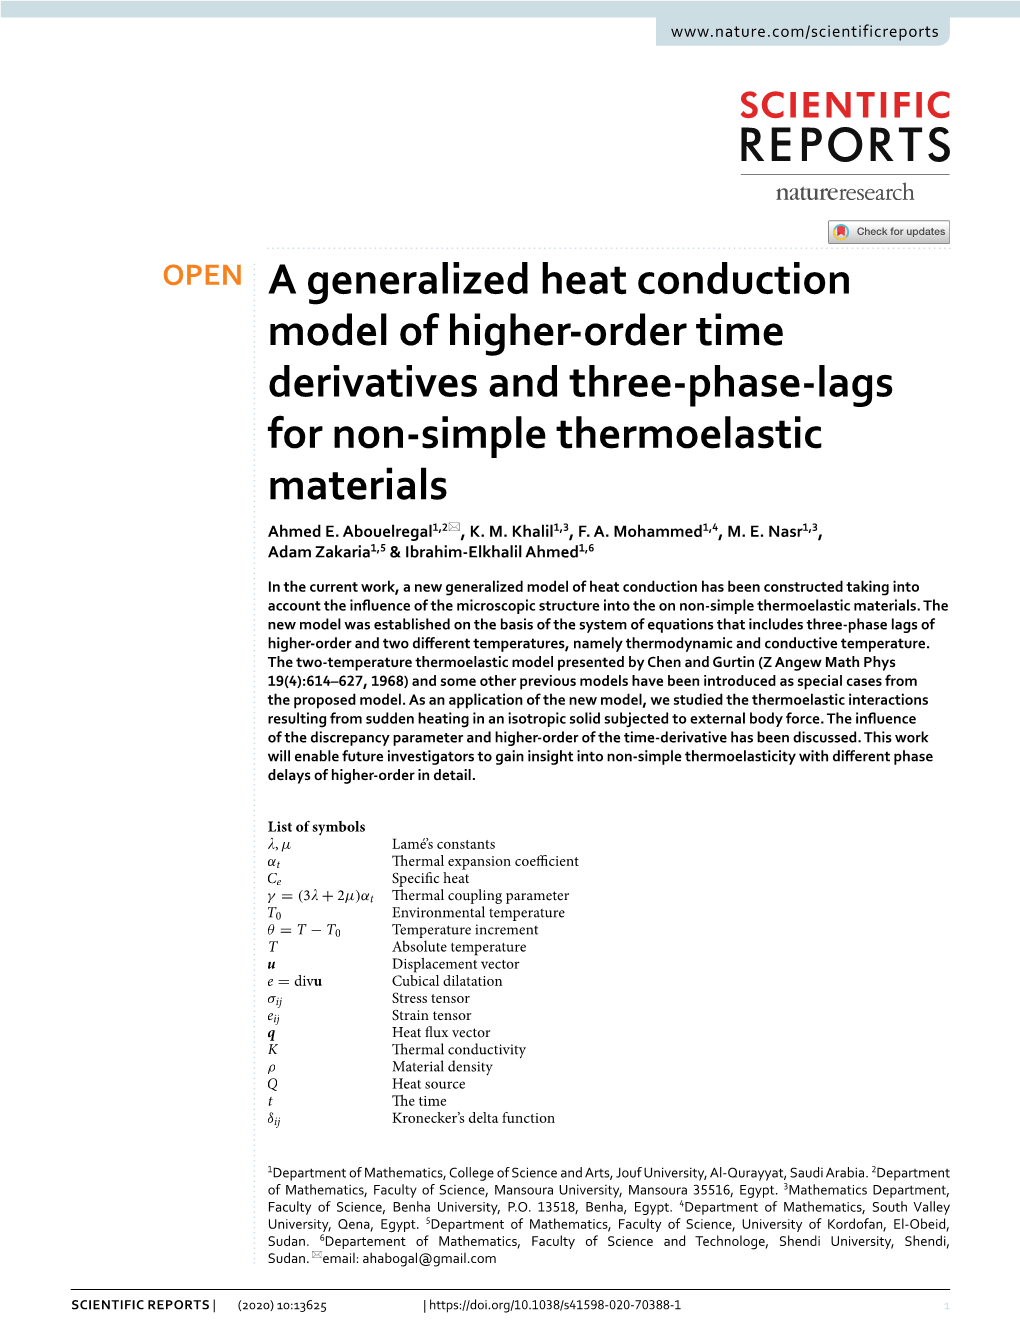 A Generalized Heat Conduction Model of Higher-Order Time Derivatives And